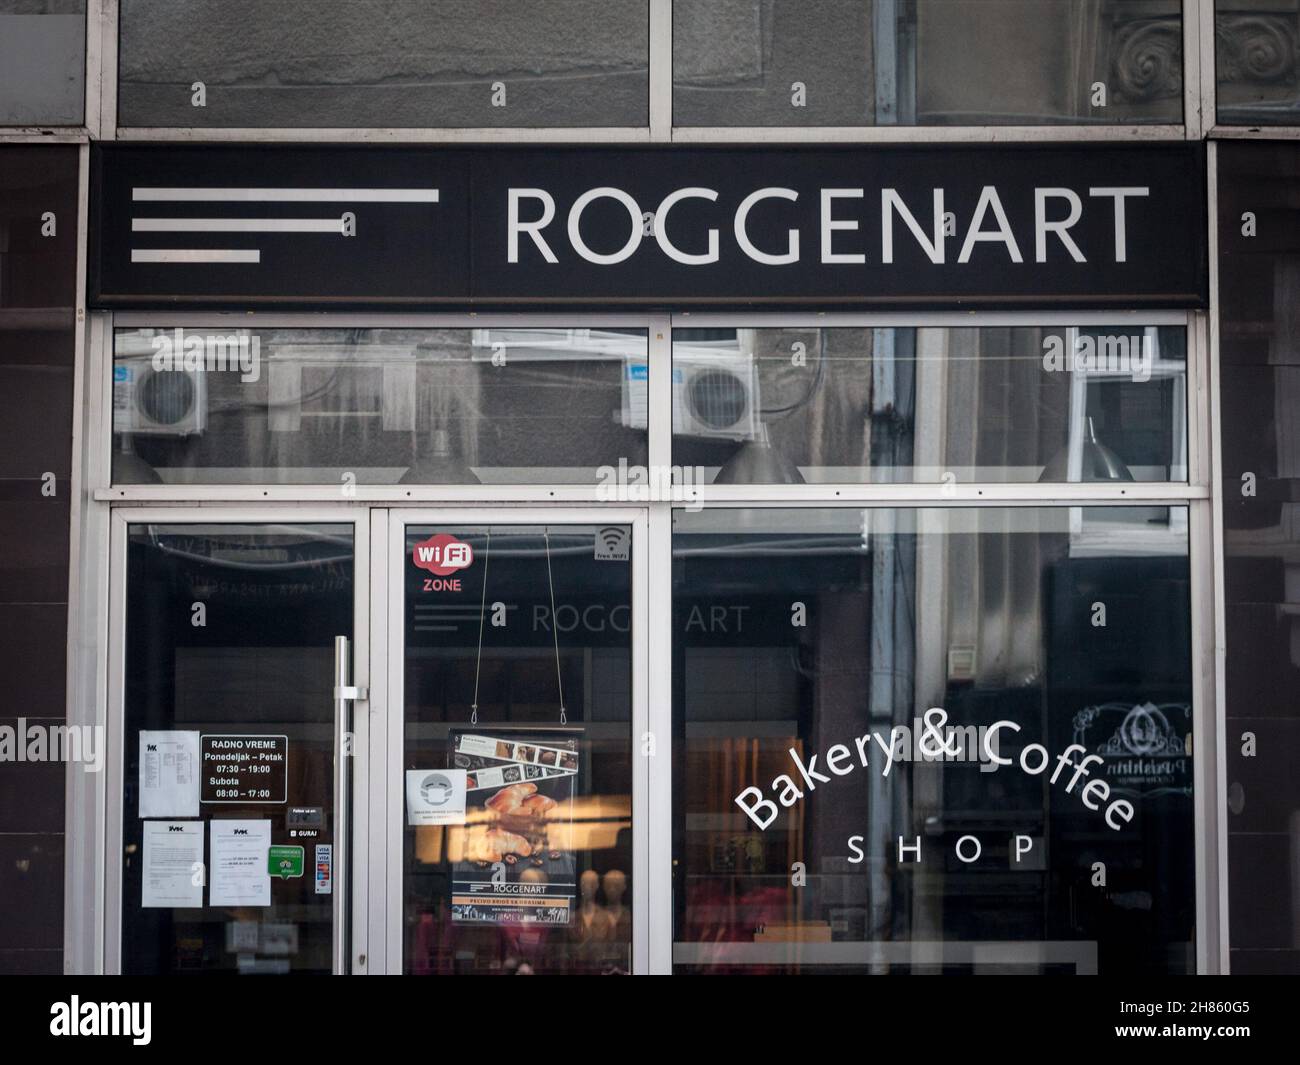 Picture of the Roggenart sign with their logo on their shop in Belgrade. Roggenart is a multinational brand from Austria, specialized in bakery and wh Stock Photo